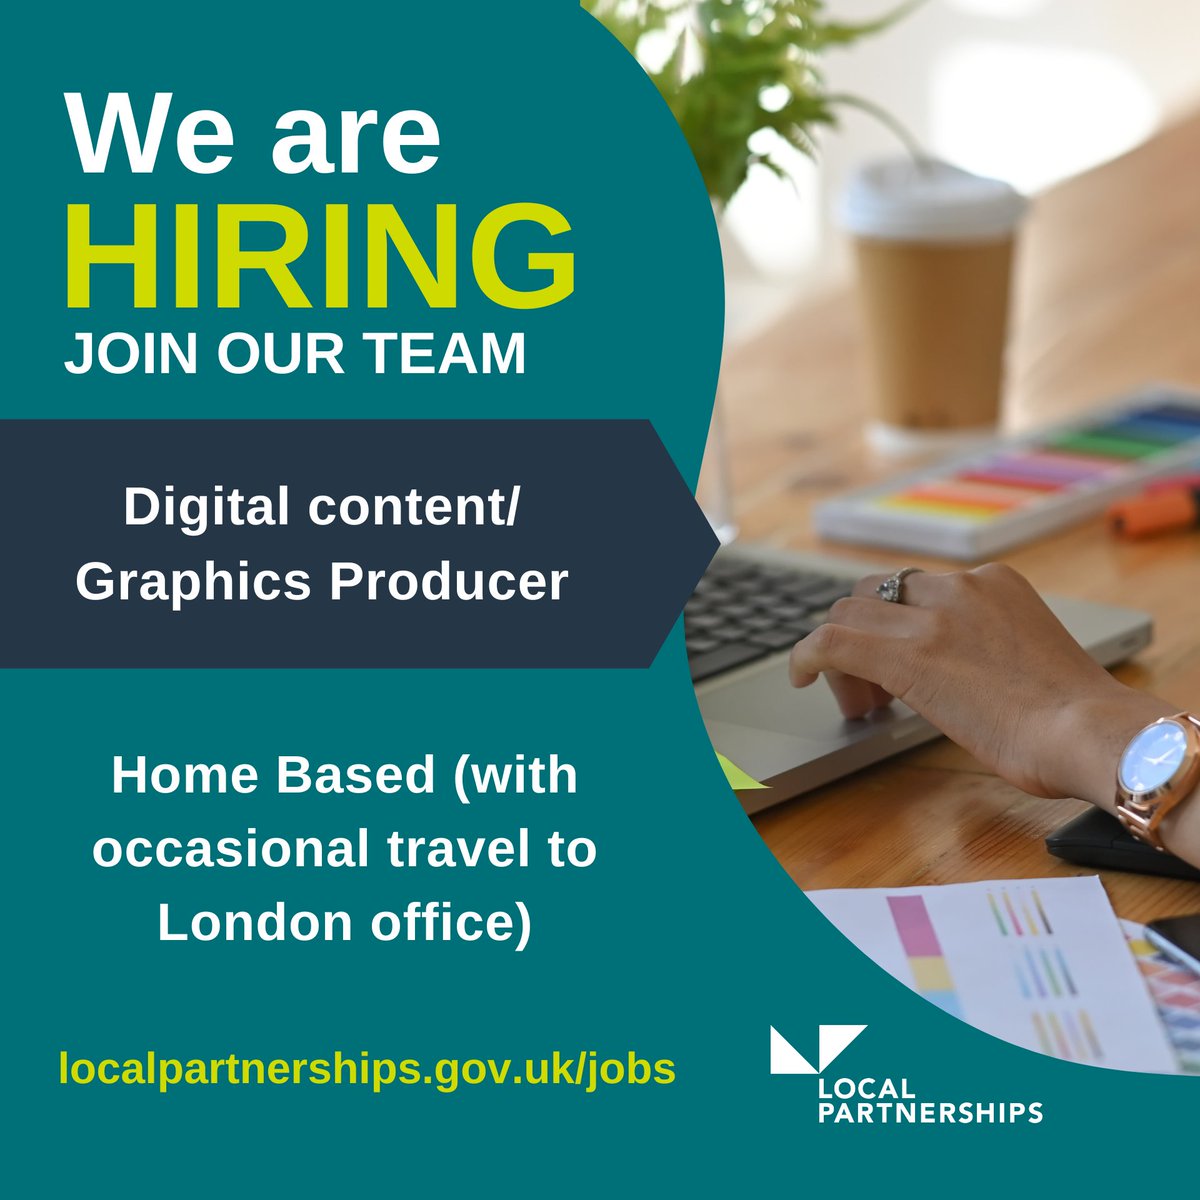 We are hiring! Join our marketing and communications team in a new Digital content/Graphics Producer role: localpartnerships.gov.uk/vacancies/digi…